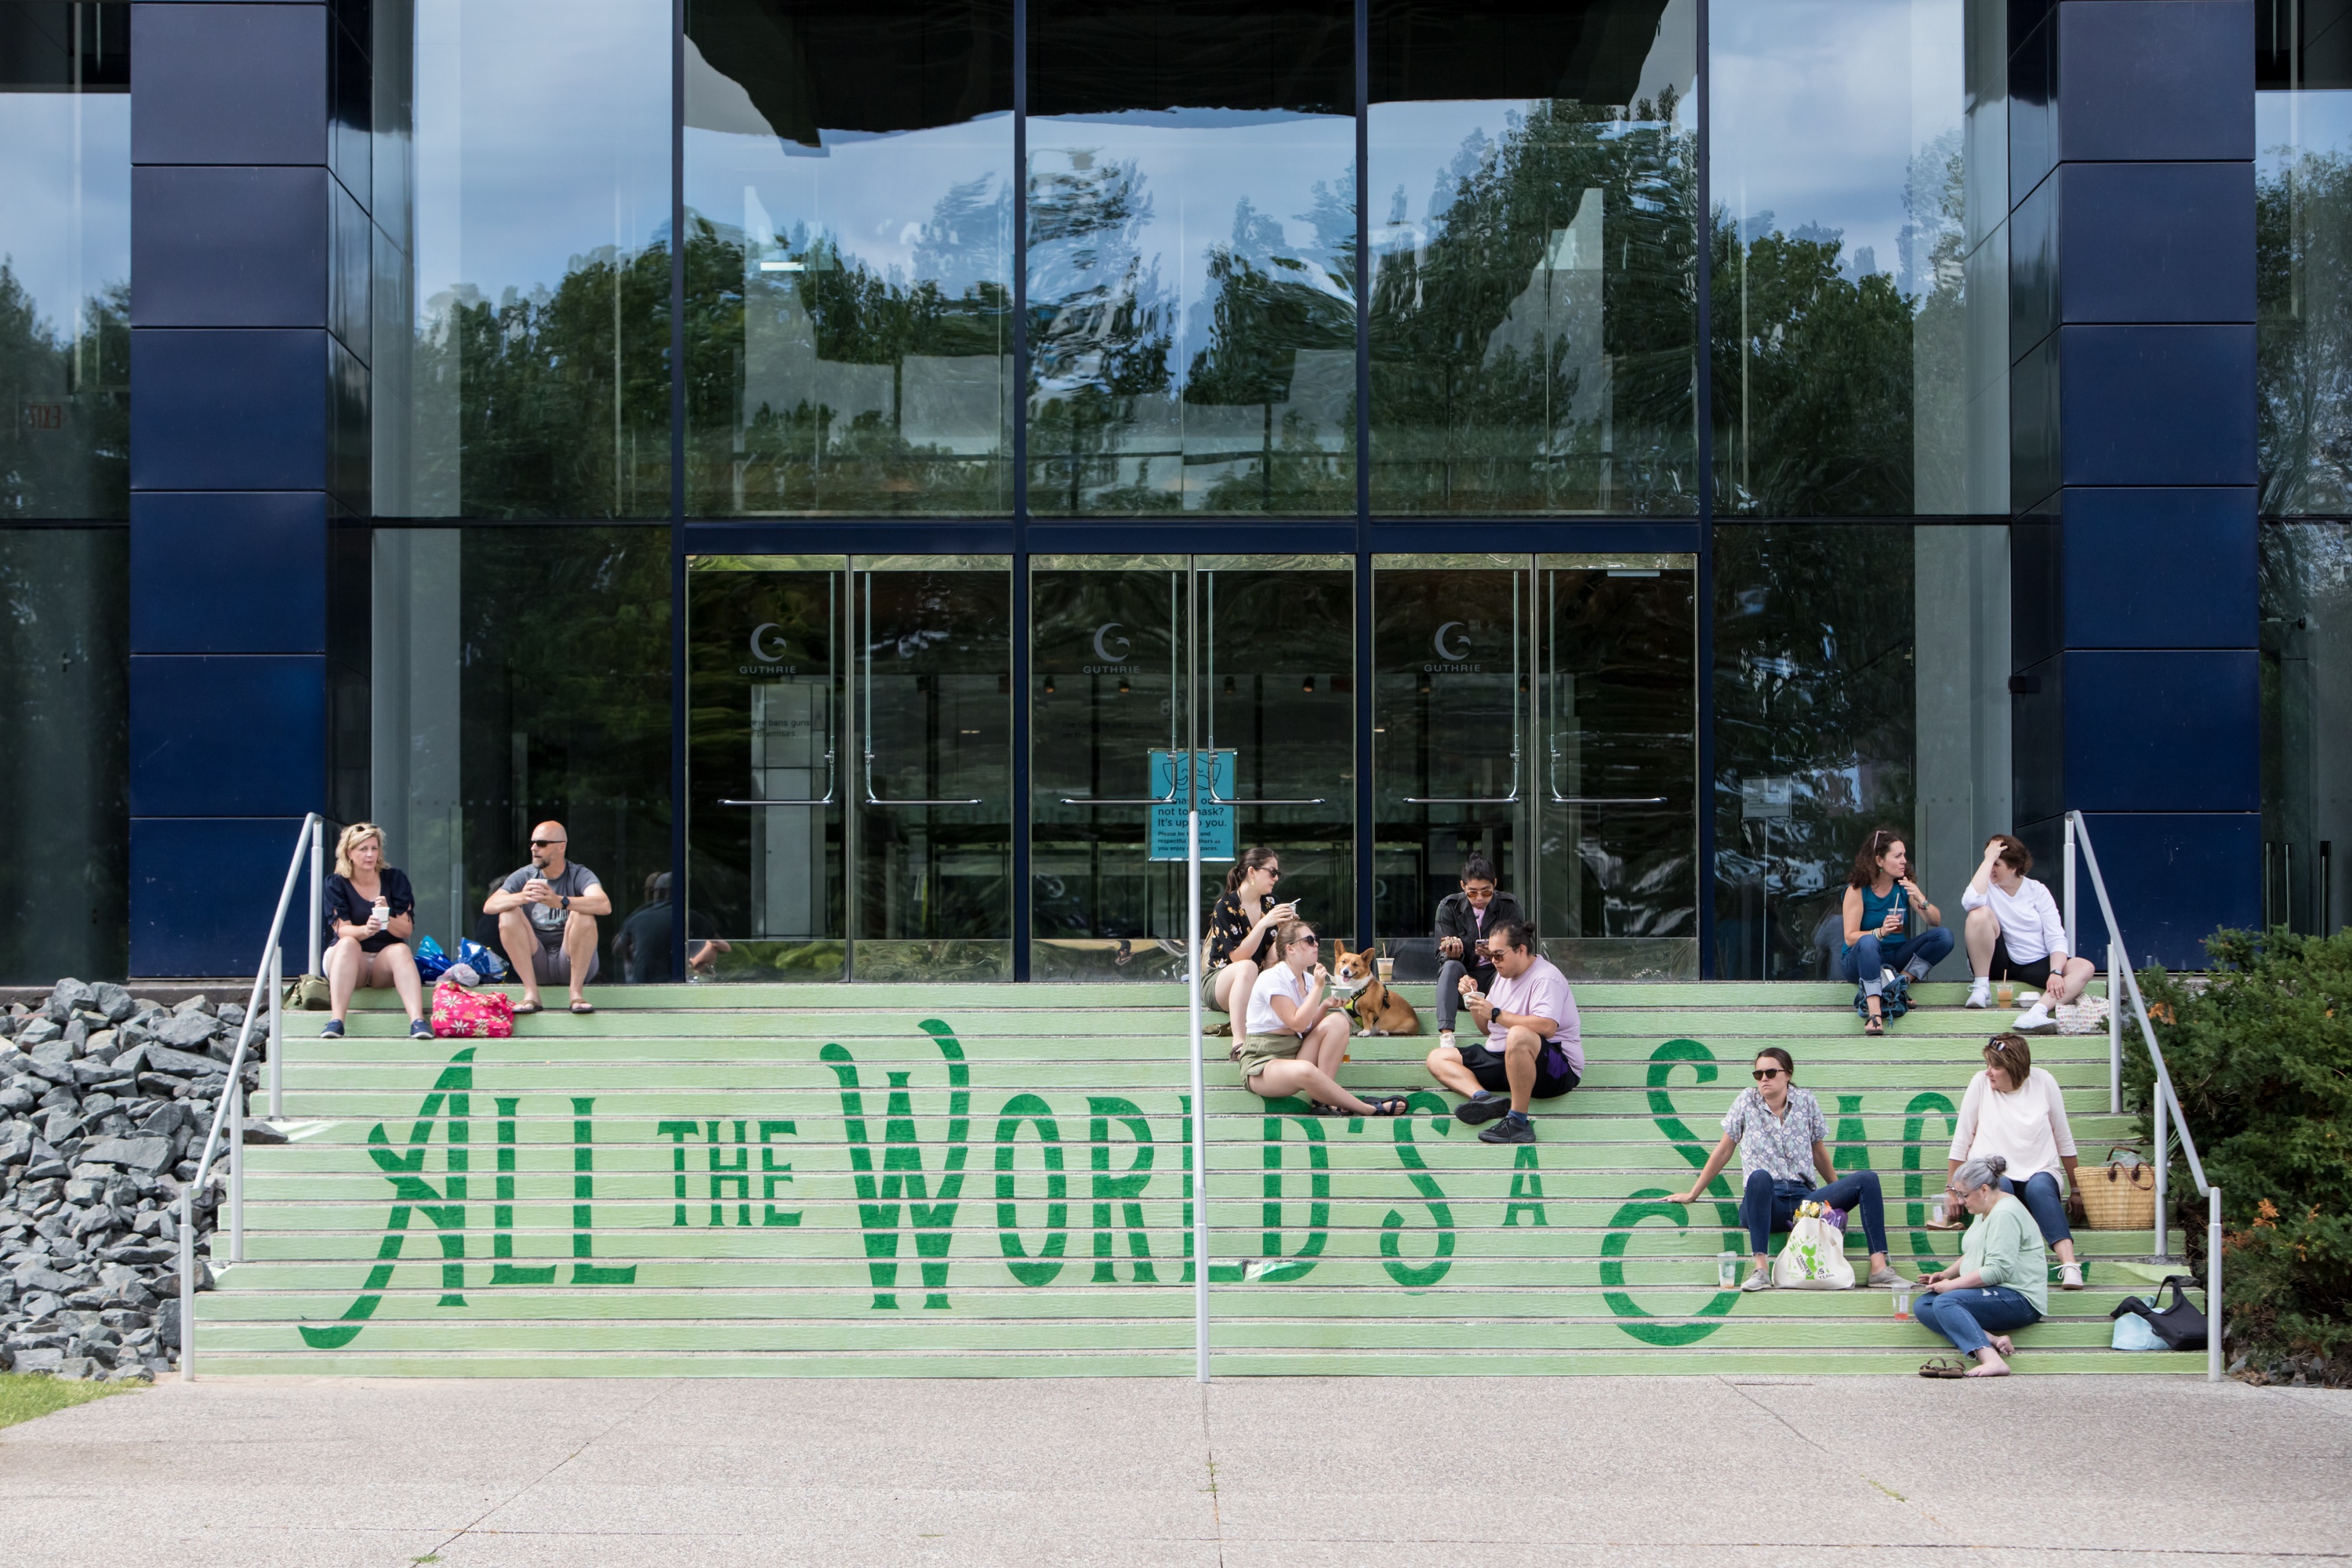 A photo of the exterior of the Guthrie building and stairs. The stairs are painted green with the words, "All the world's a stage". 